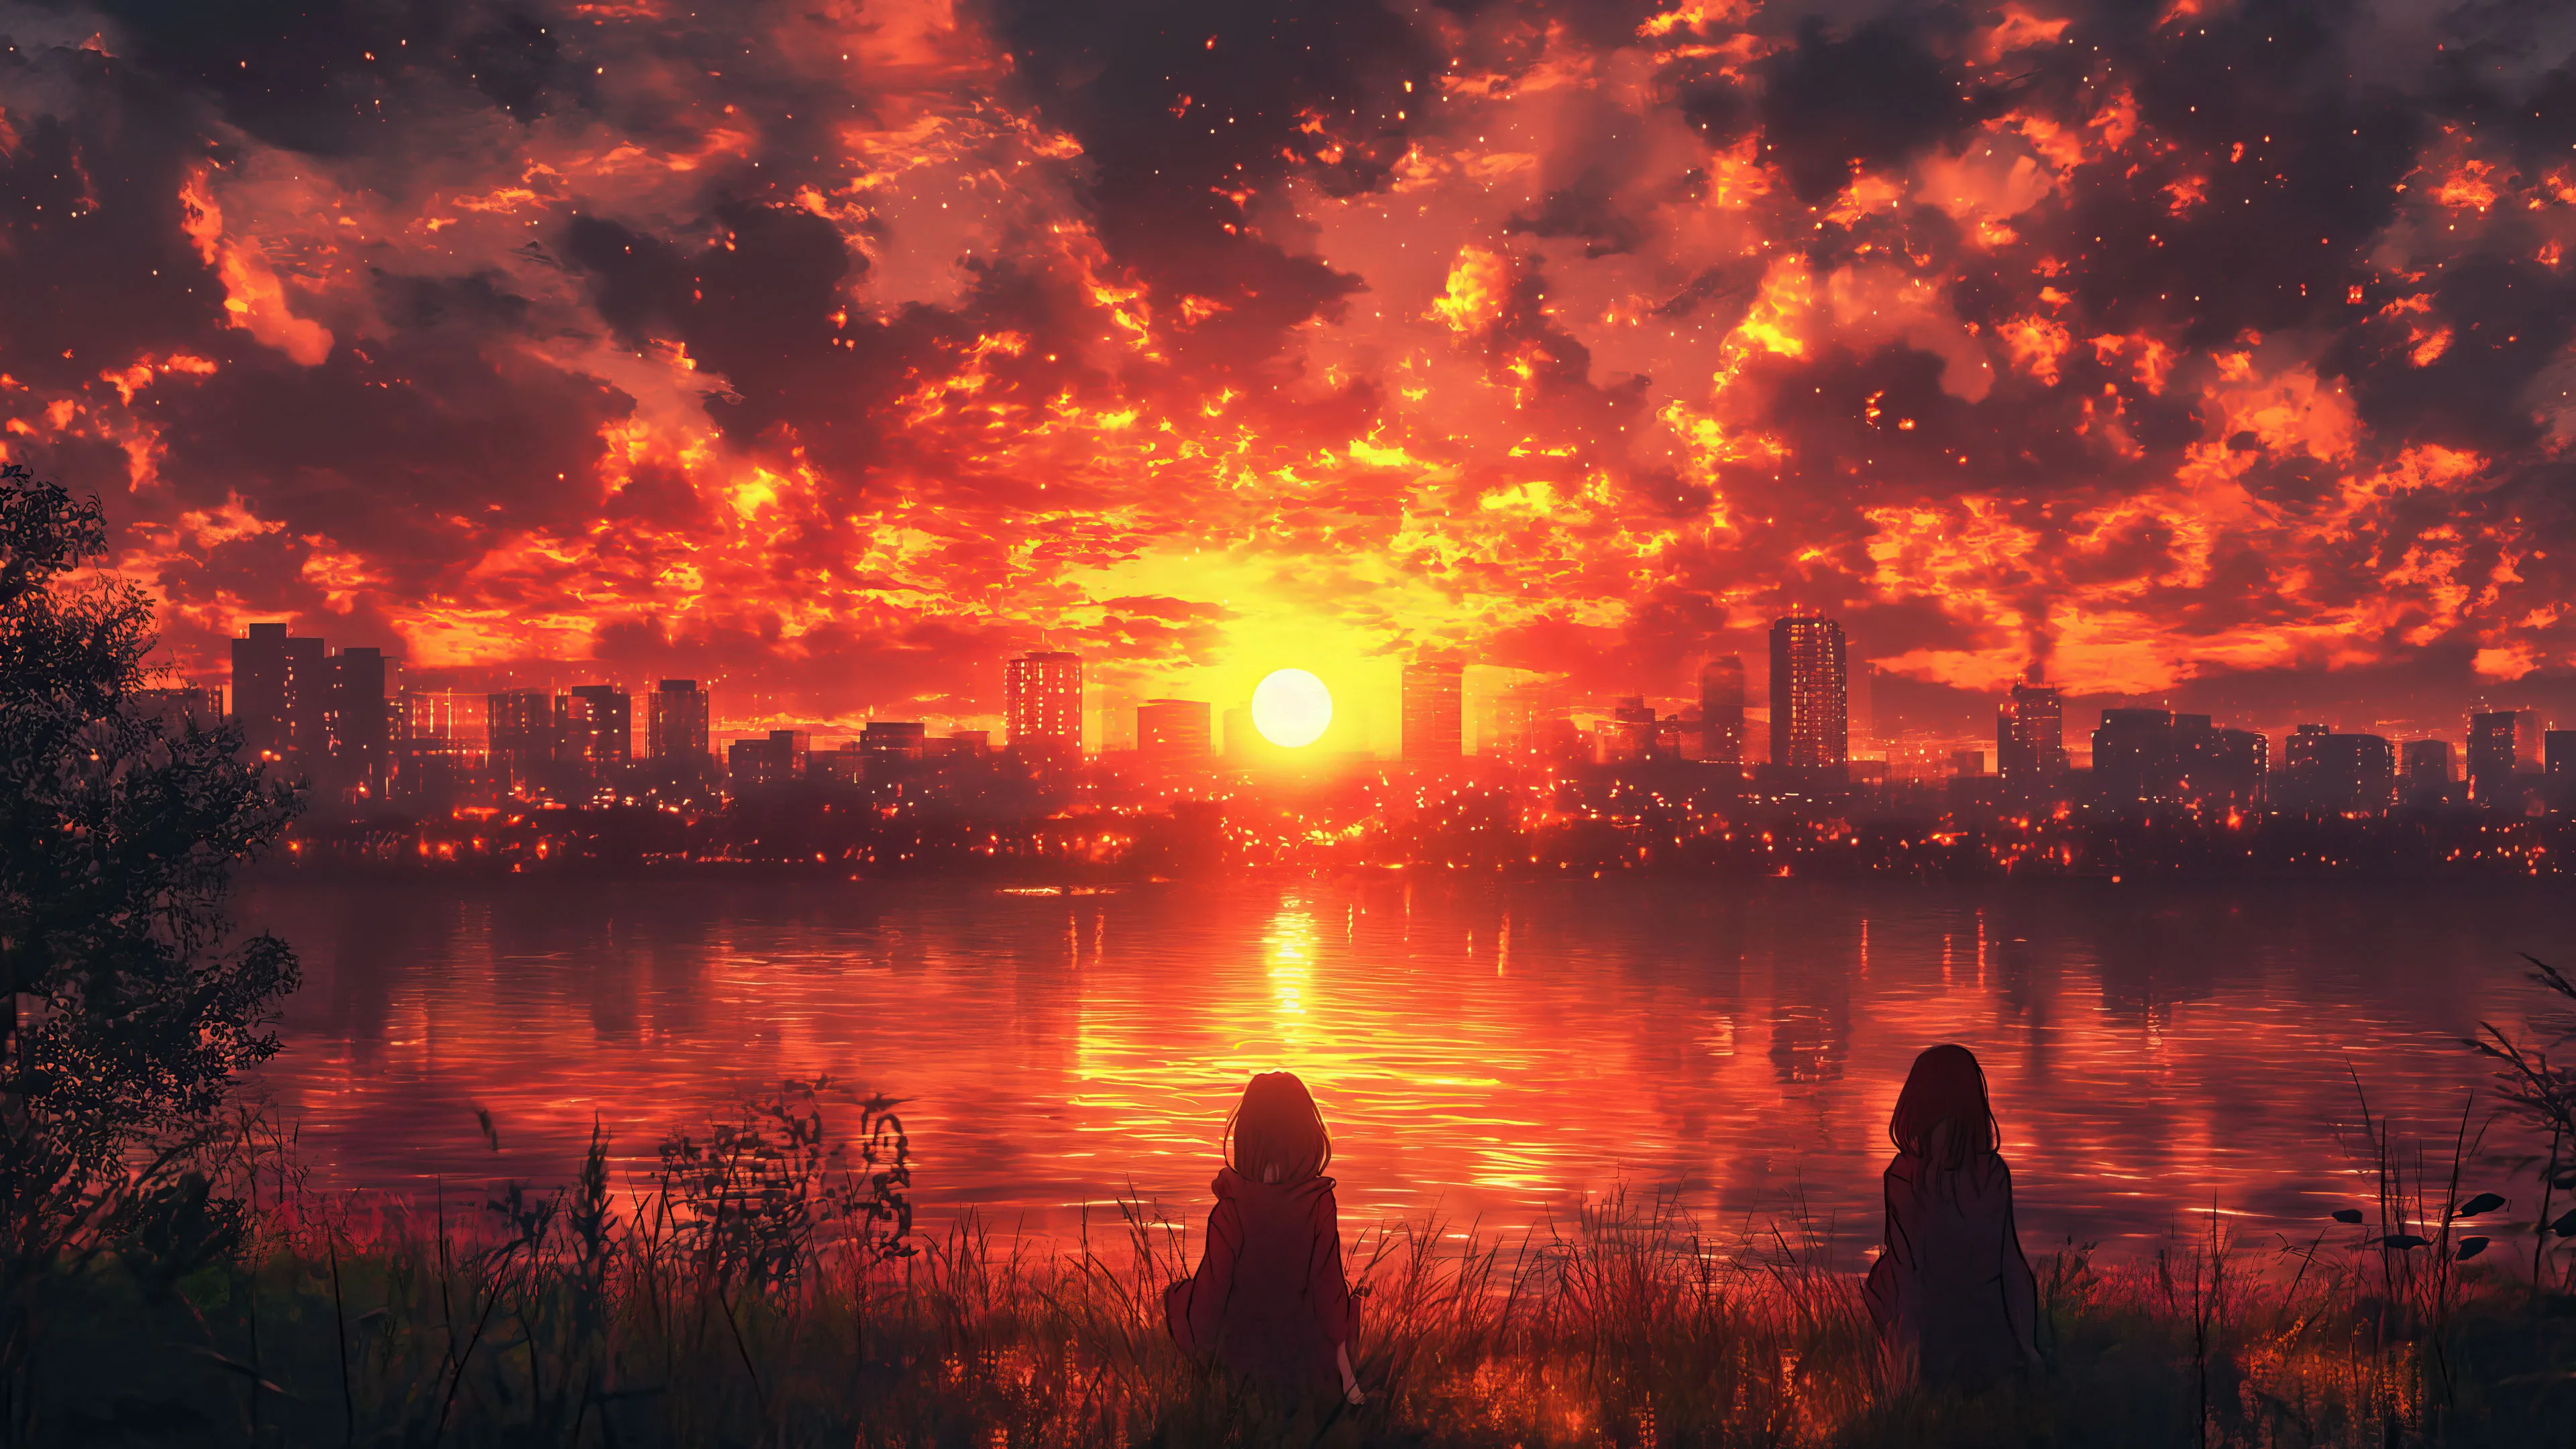 A breathtaking 4K wallpaper capturing the essence of a golden sunset casting its warm glow over a city skyline. This AI-generated masterpiece showcases the urban landscape in silhouette against the radiant sky, creating a mesmerizing and atmospheric scene.